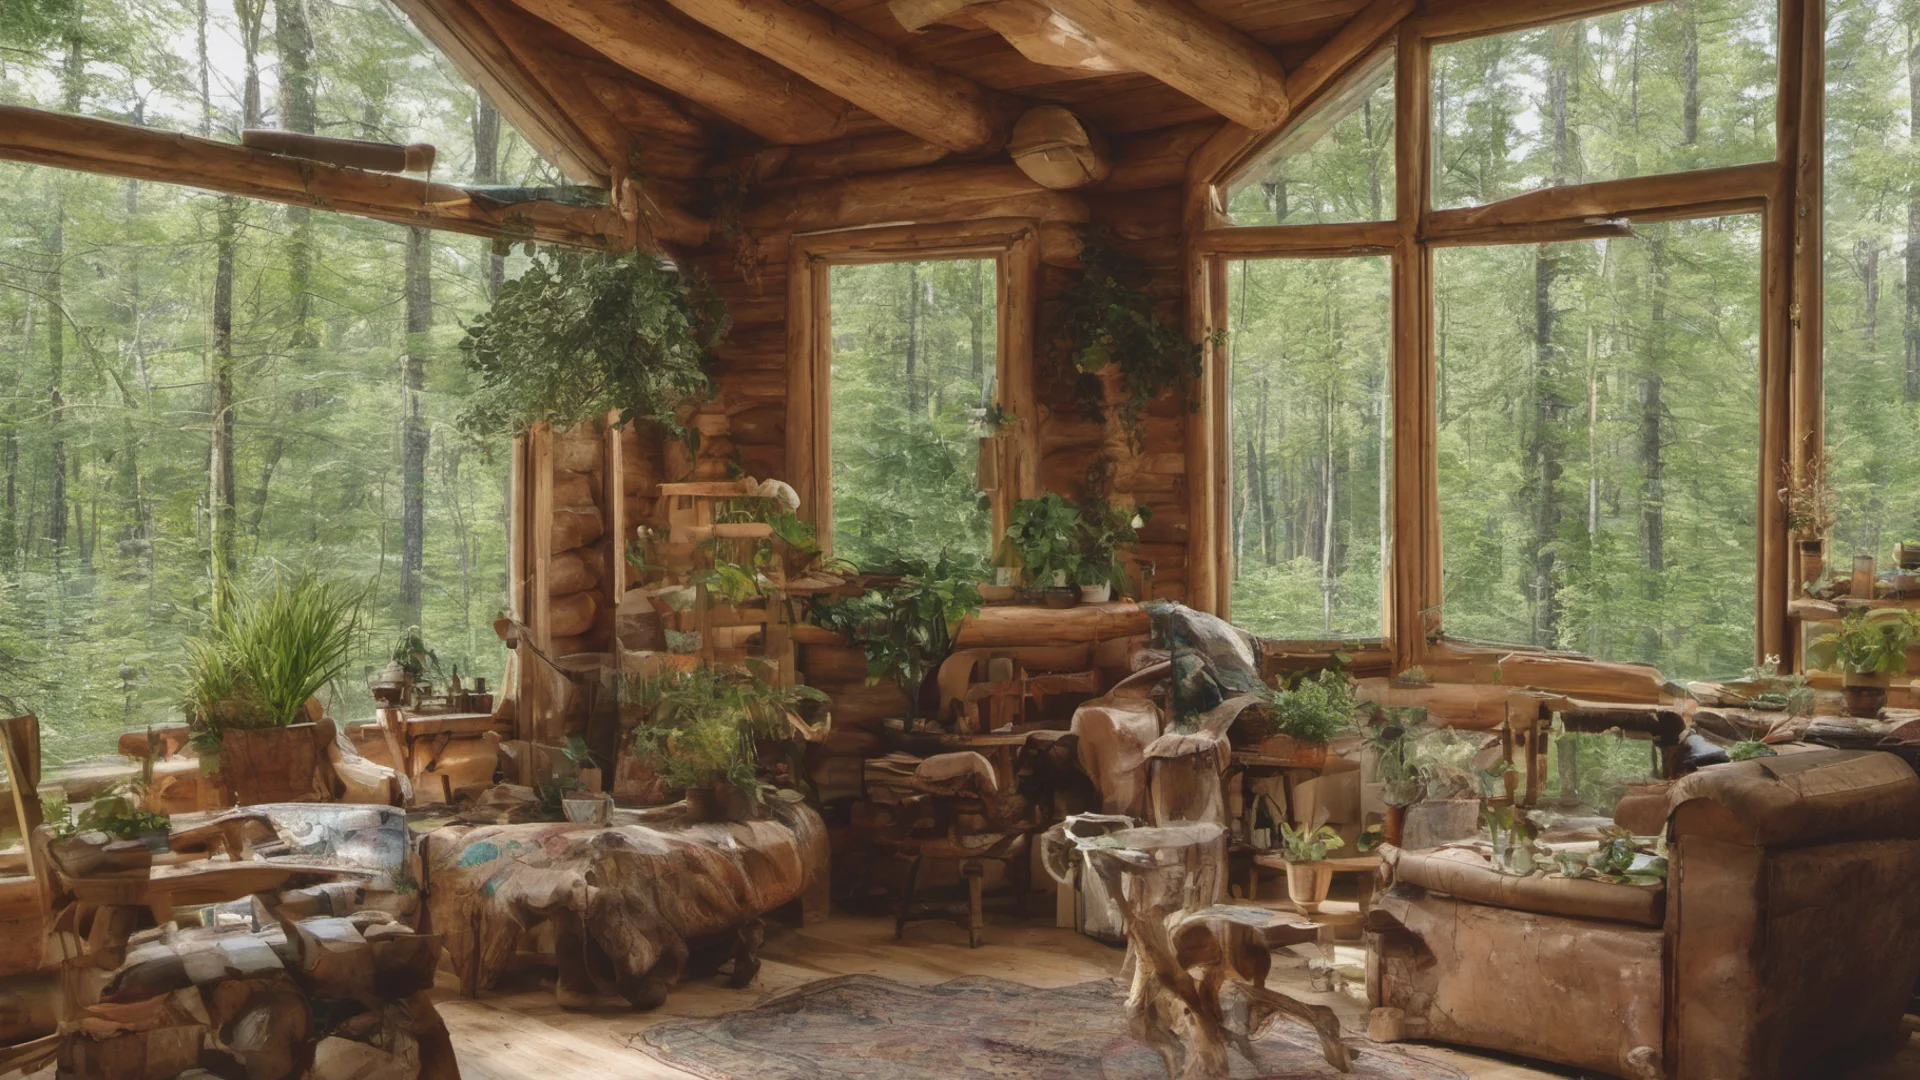 ailog cabin interior with many plants and large windows looking into a forest wide